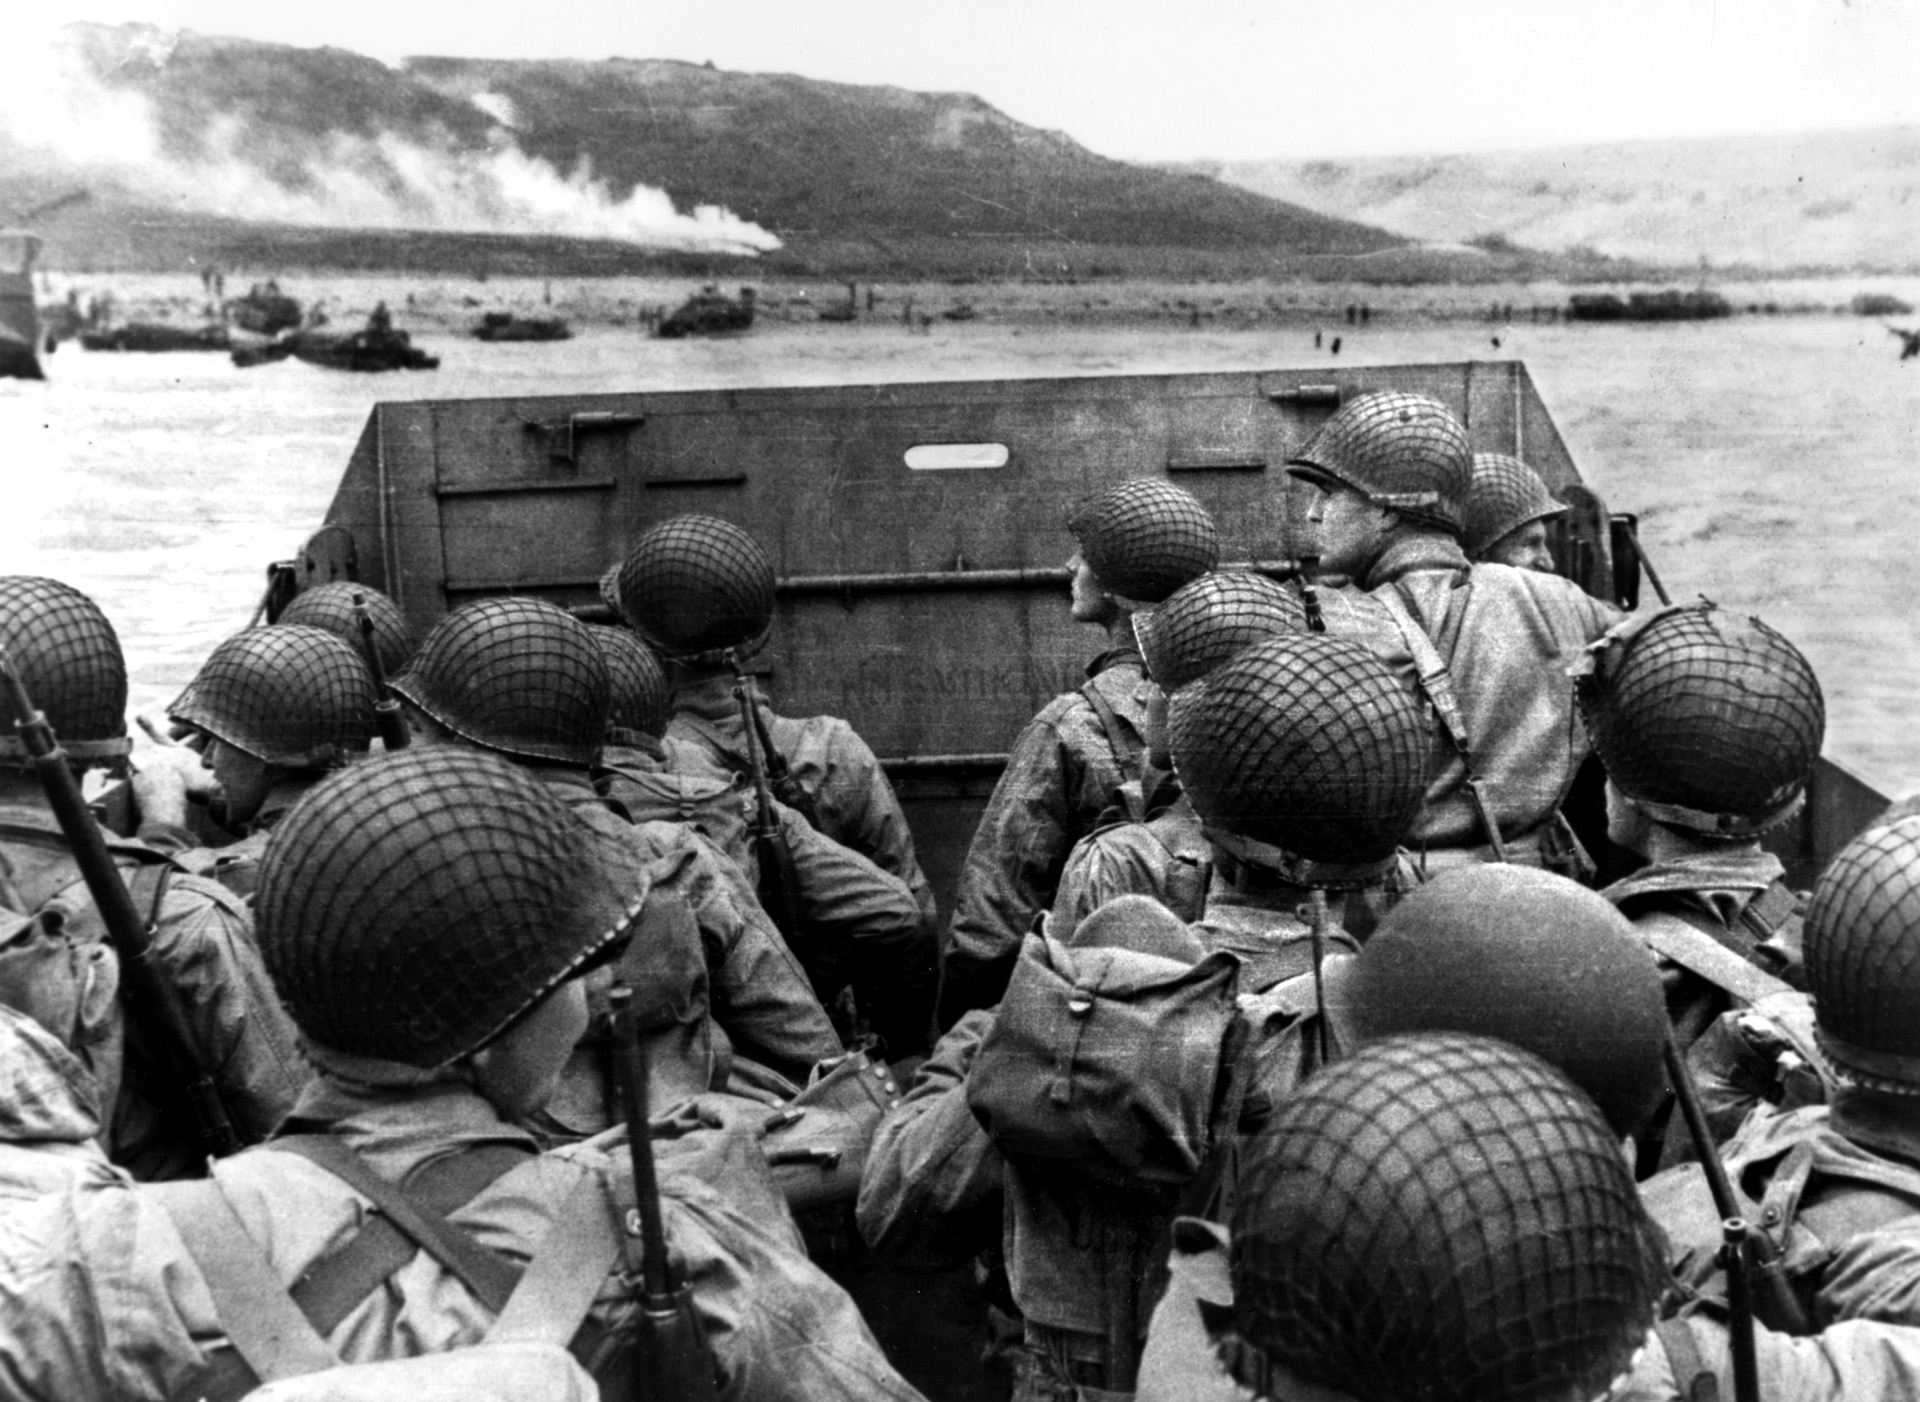 Men of the 16th Infantry Regiment peer over the sides of their LCVP toward smoky Omaha Beach and nervously await the moment when the ramp will drop and they will wade into hell. 